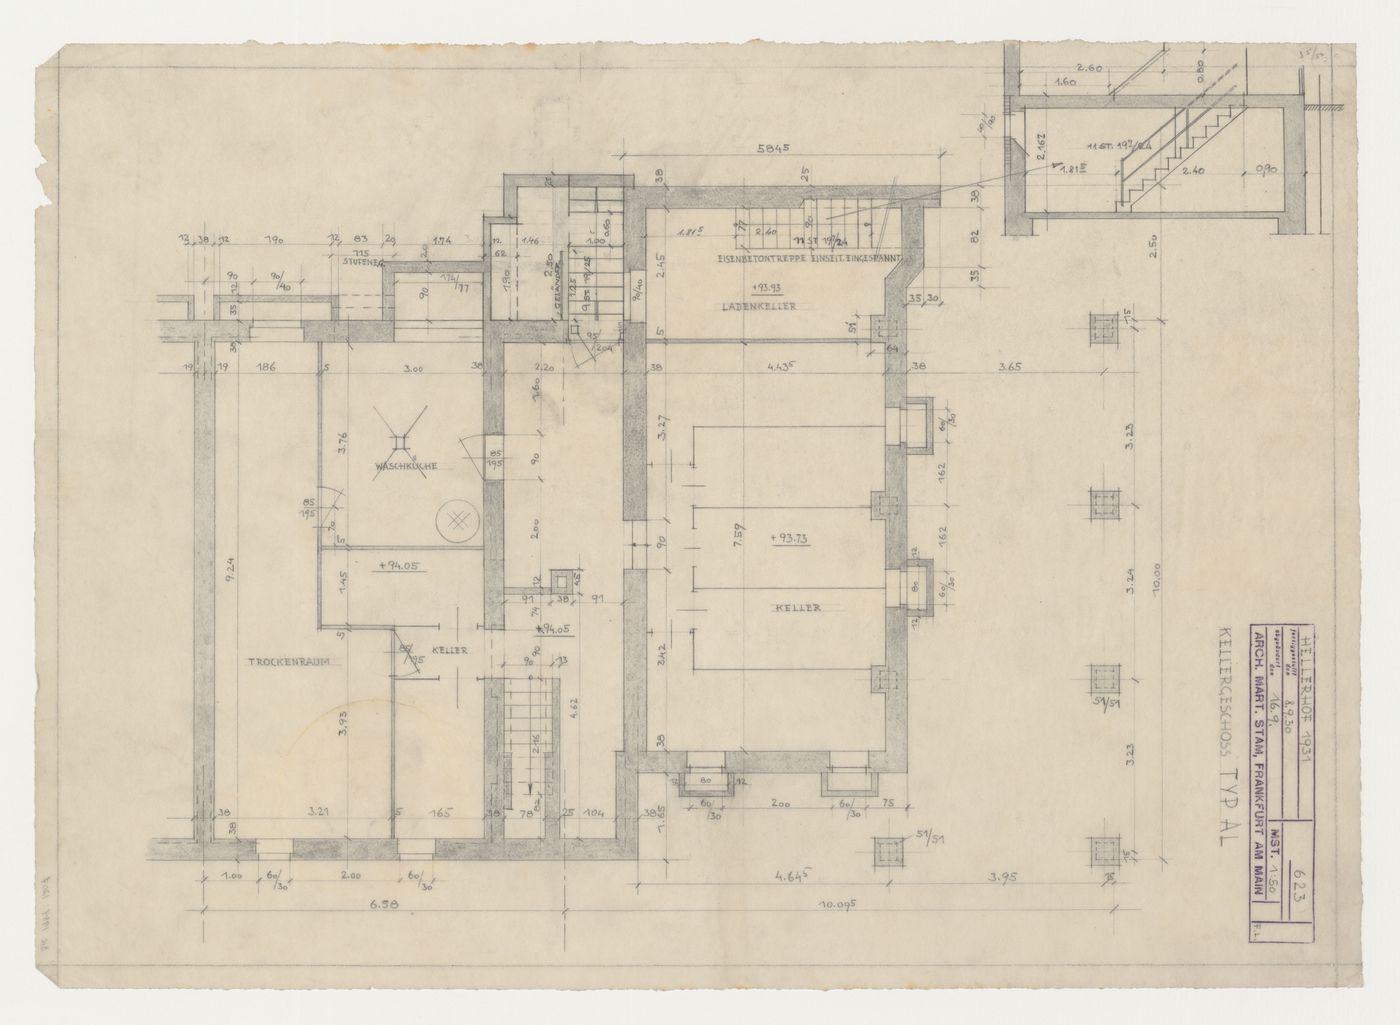 Basement plan and section for a type AL housing unit, Hellerhof Housing Estate, Frankfurt am Main, Germany